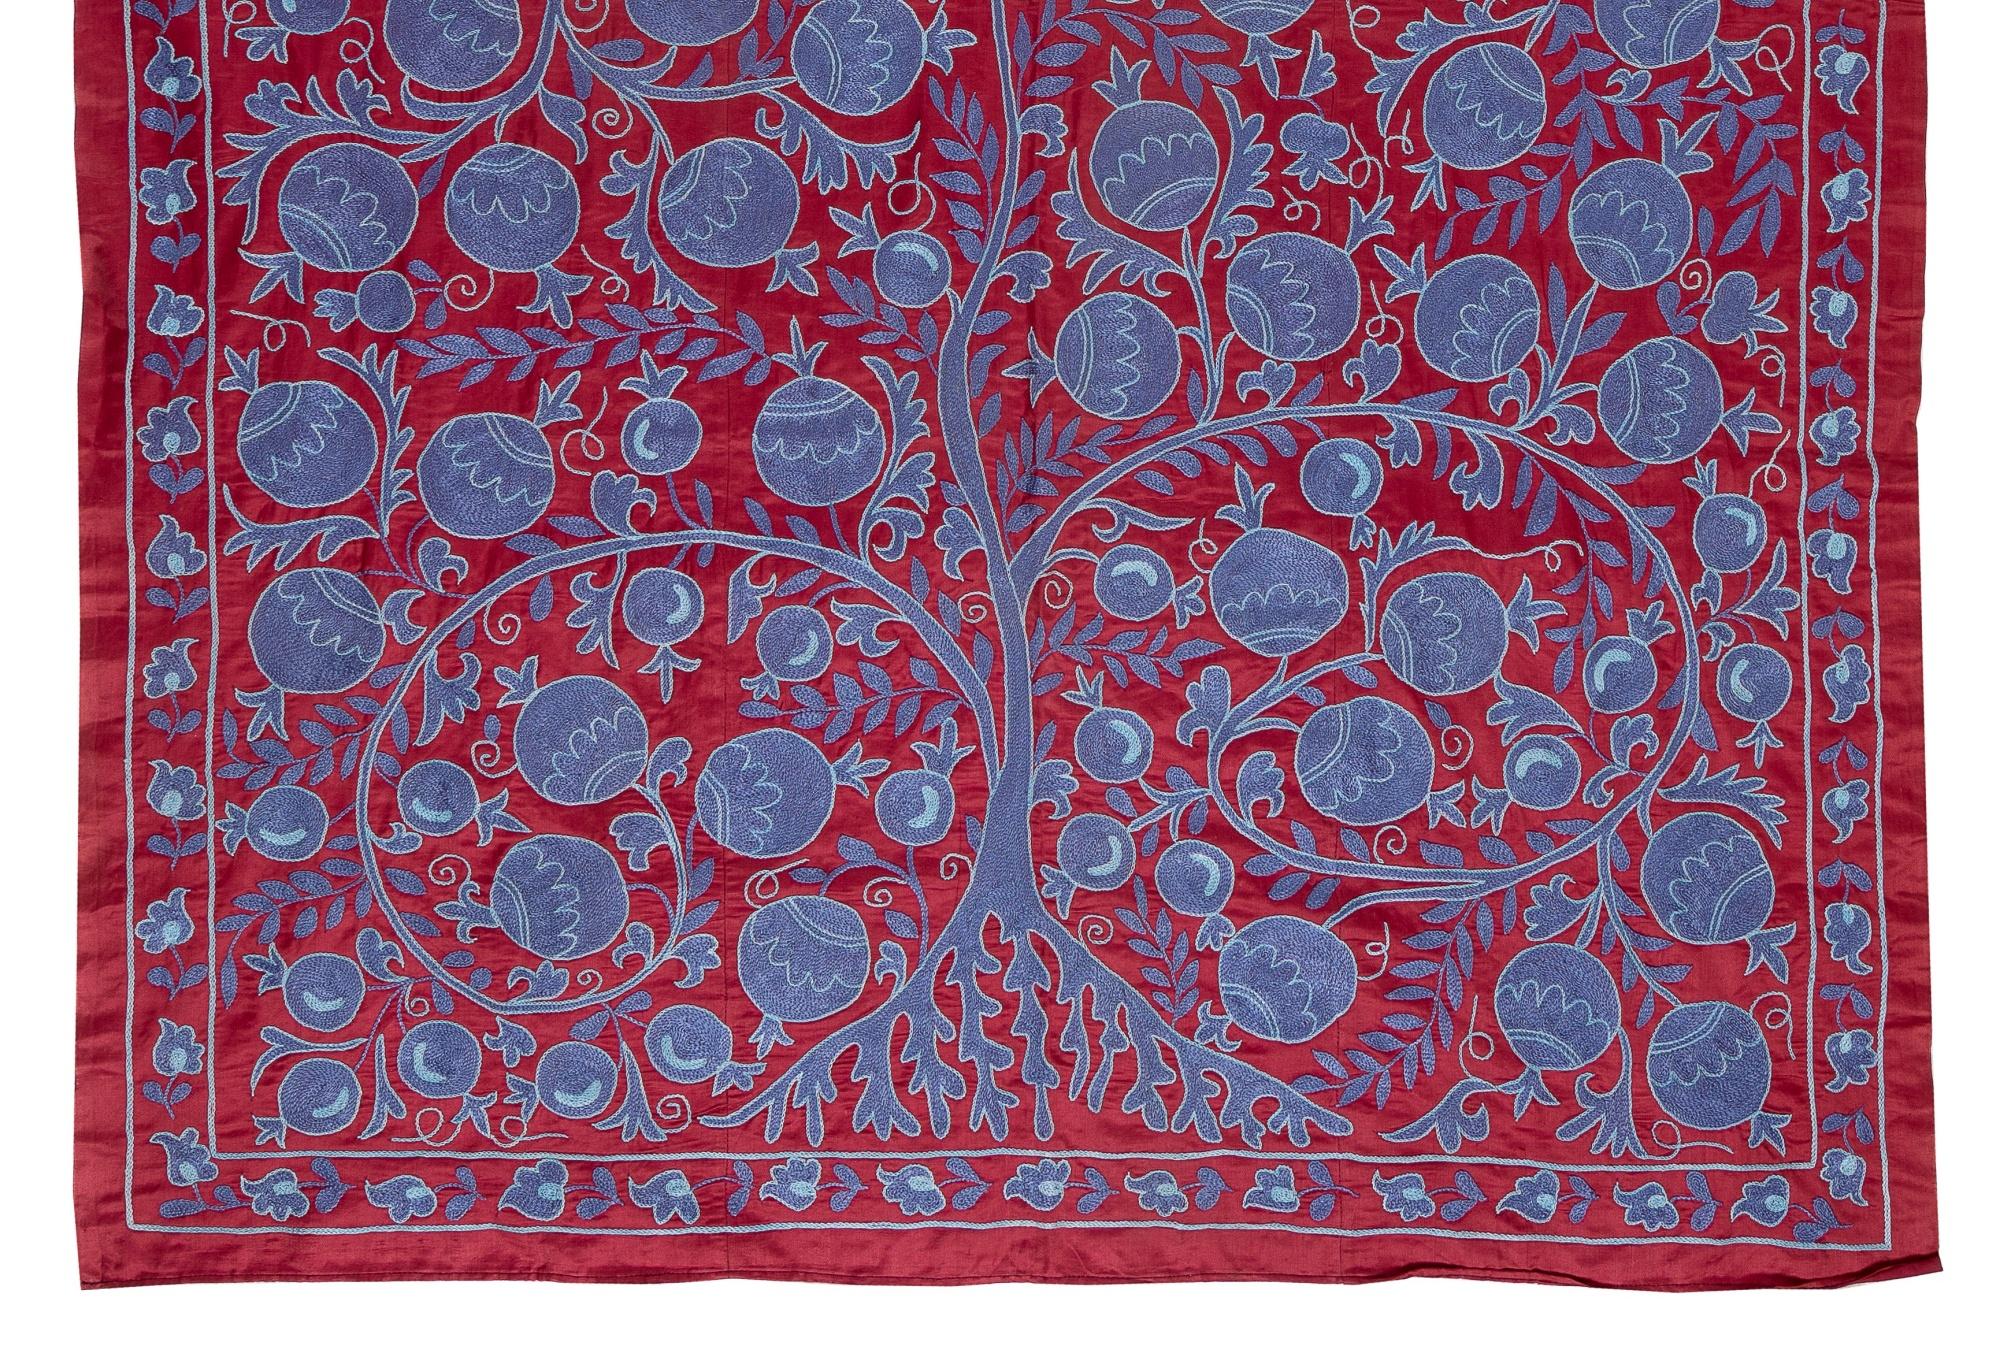 Suzani 5x7 ft Pomegranate Tree Design Bedspread in Red & Purple, Silk Embroidery Throw